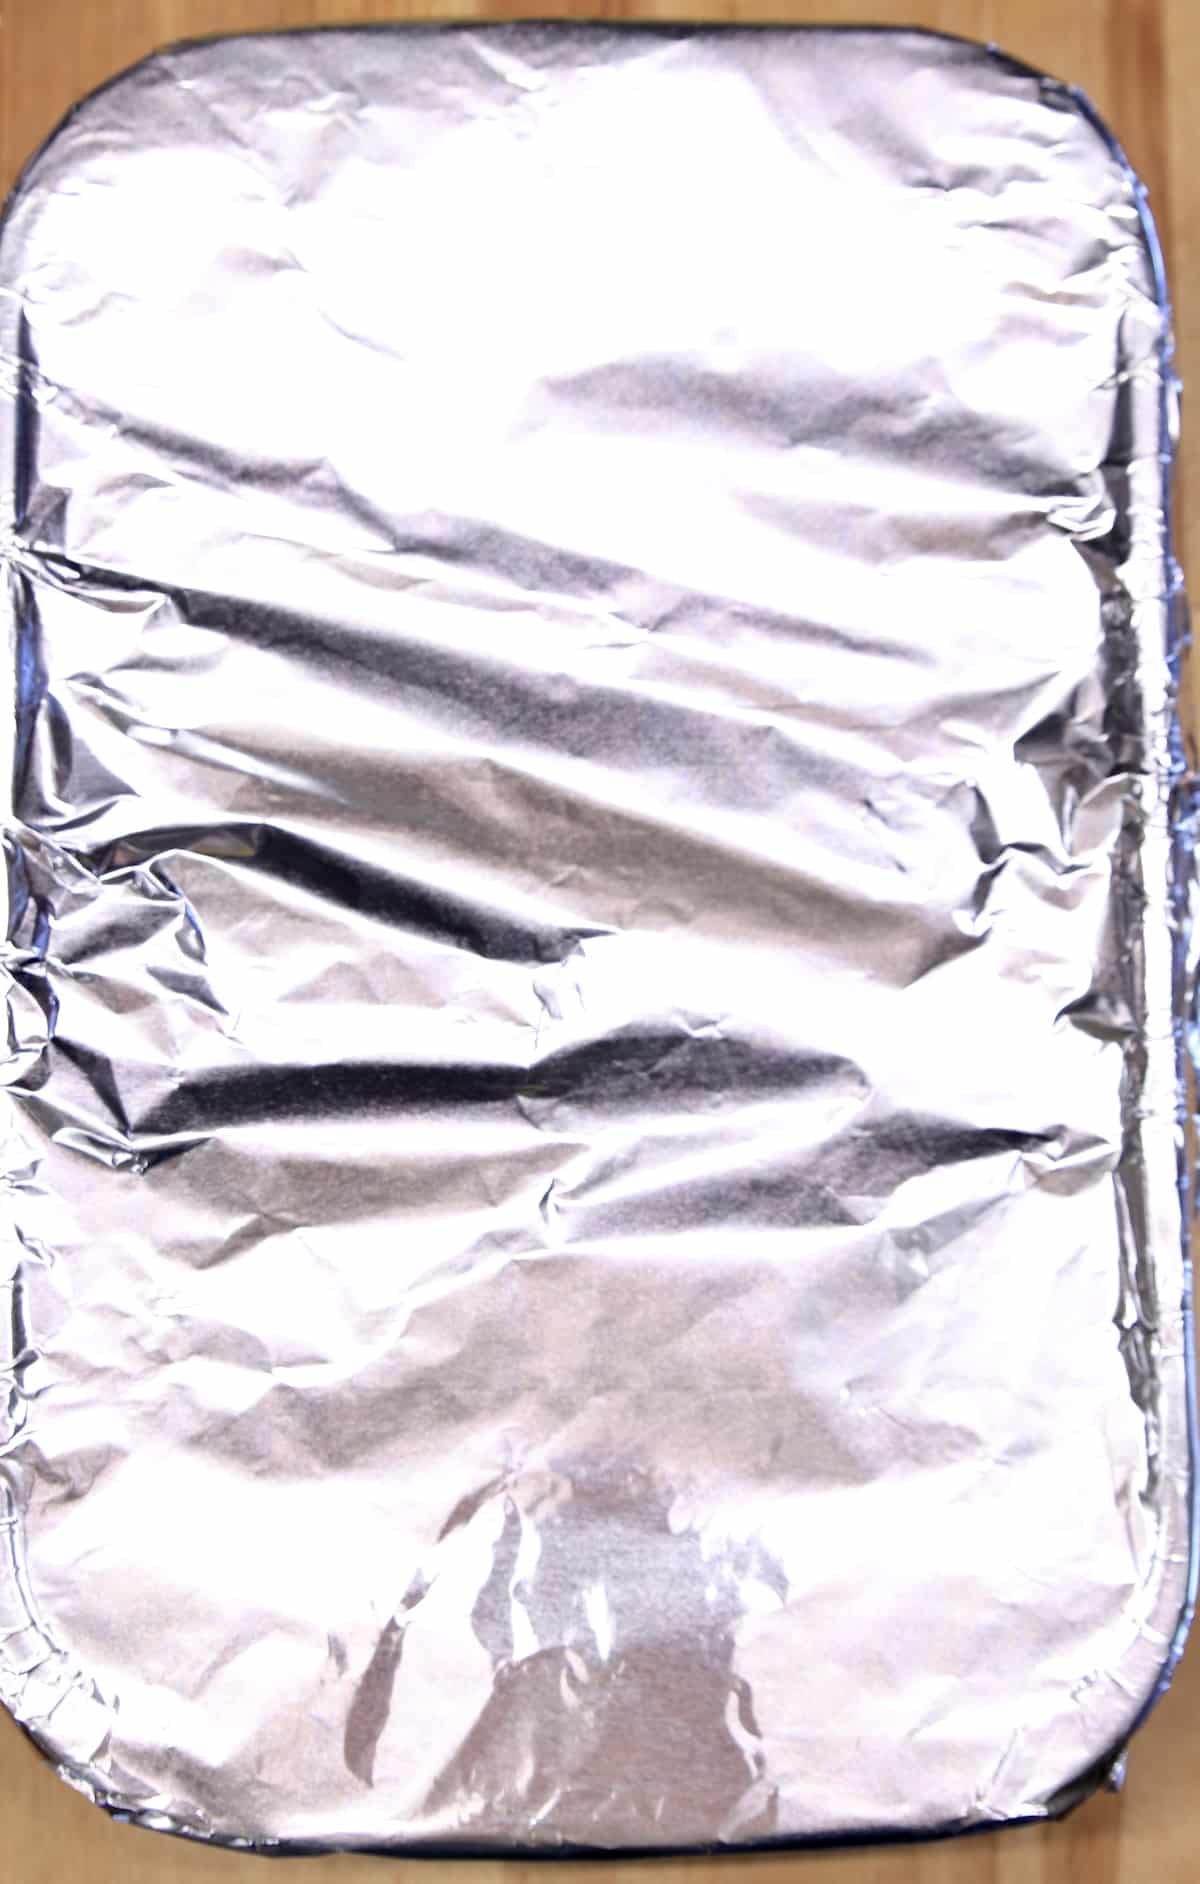 Foil covered pan. 